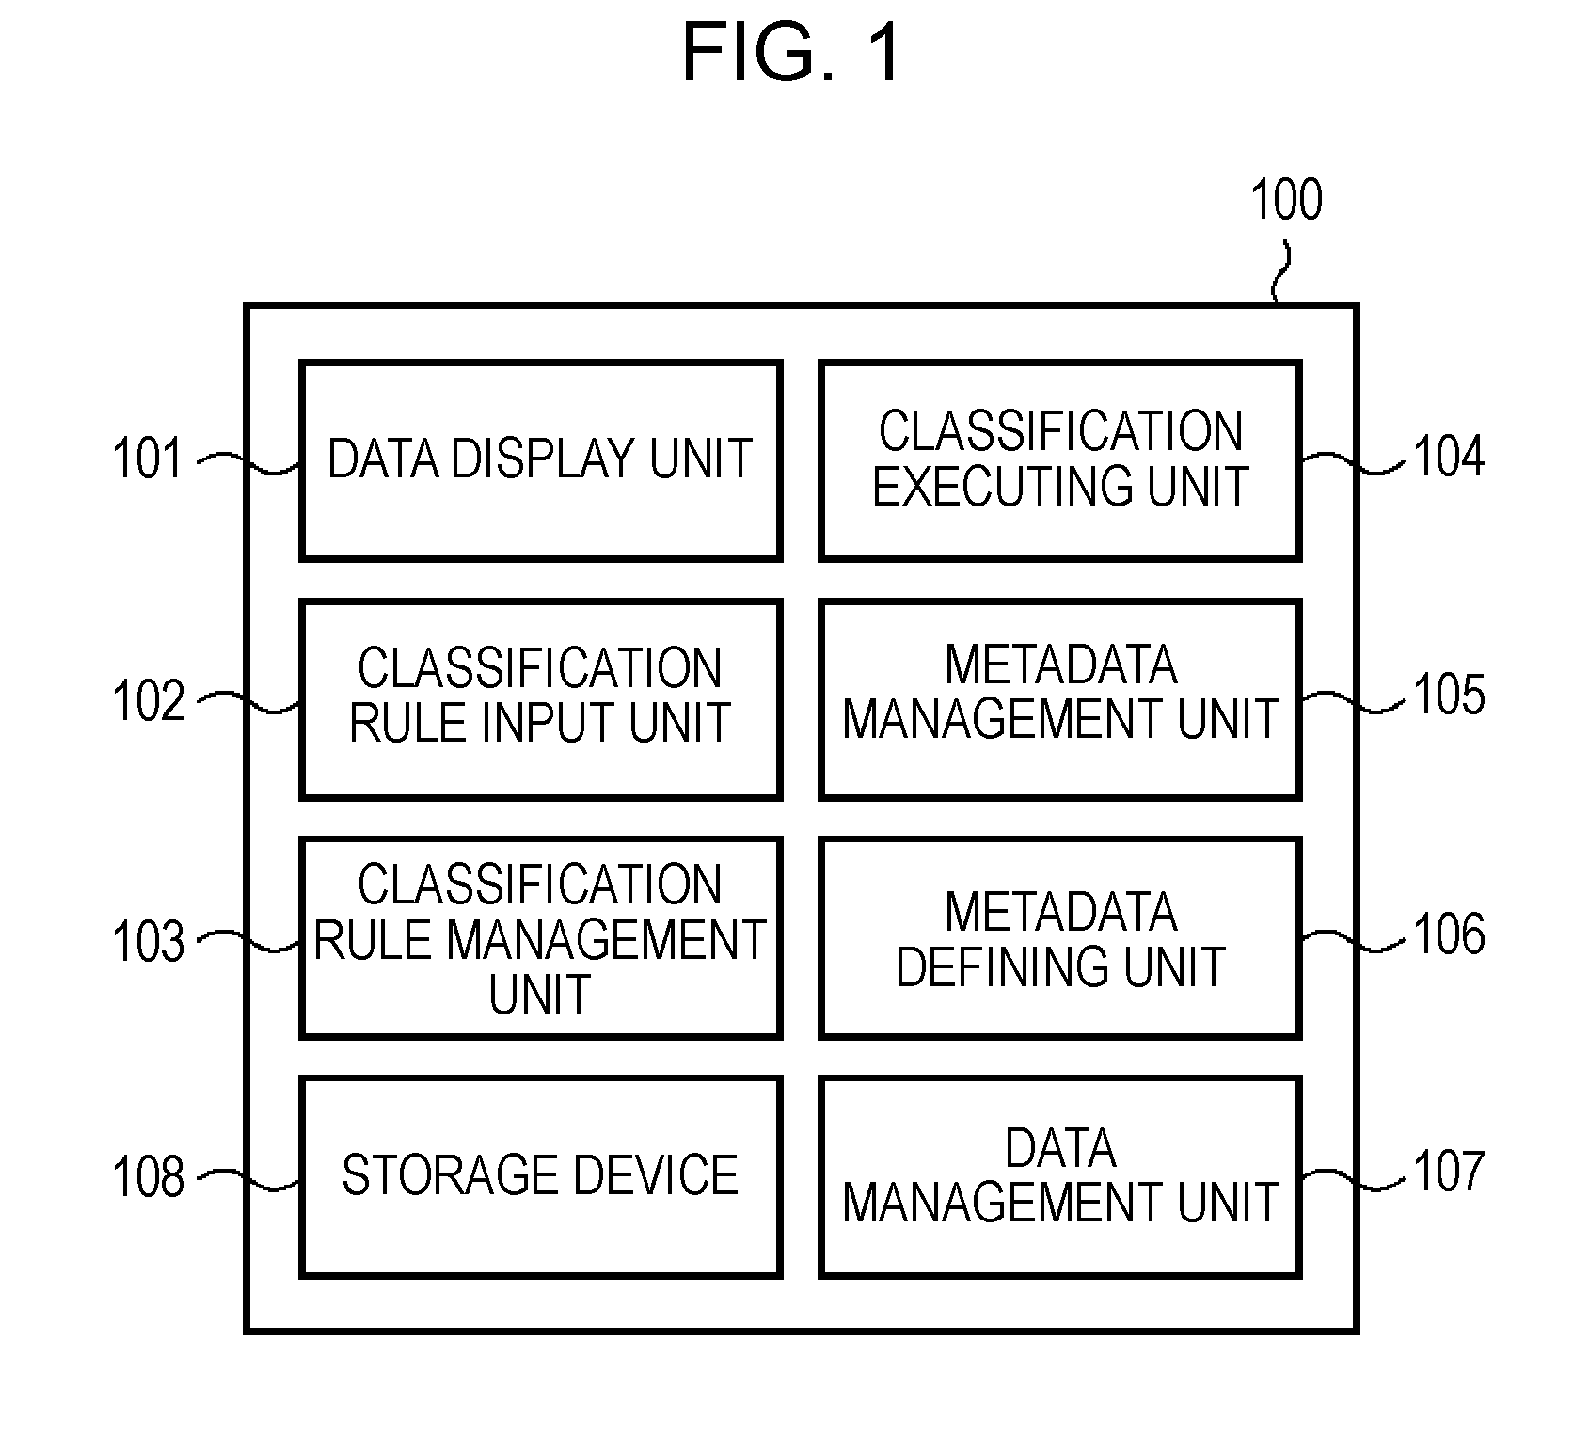 Data management apparatus and method for managing data elements using a plurality of metadata elements